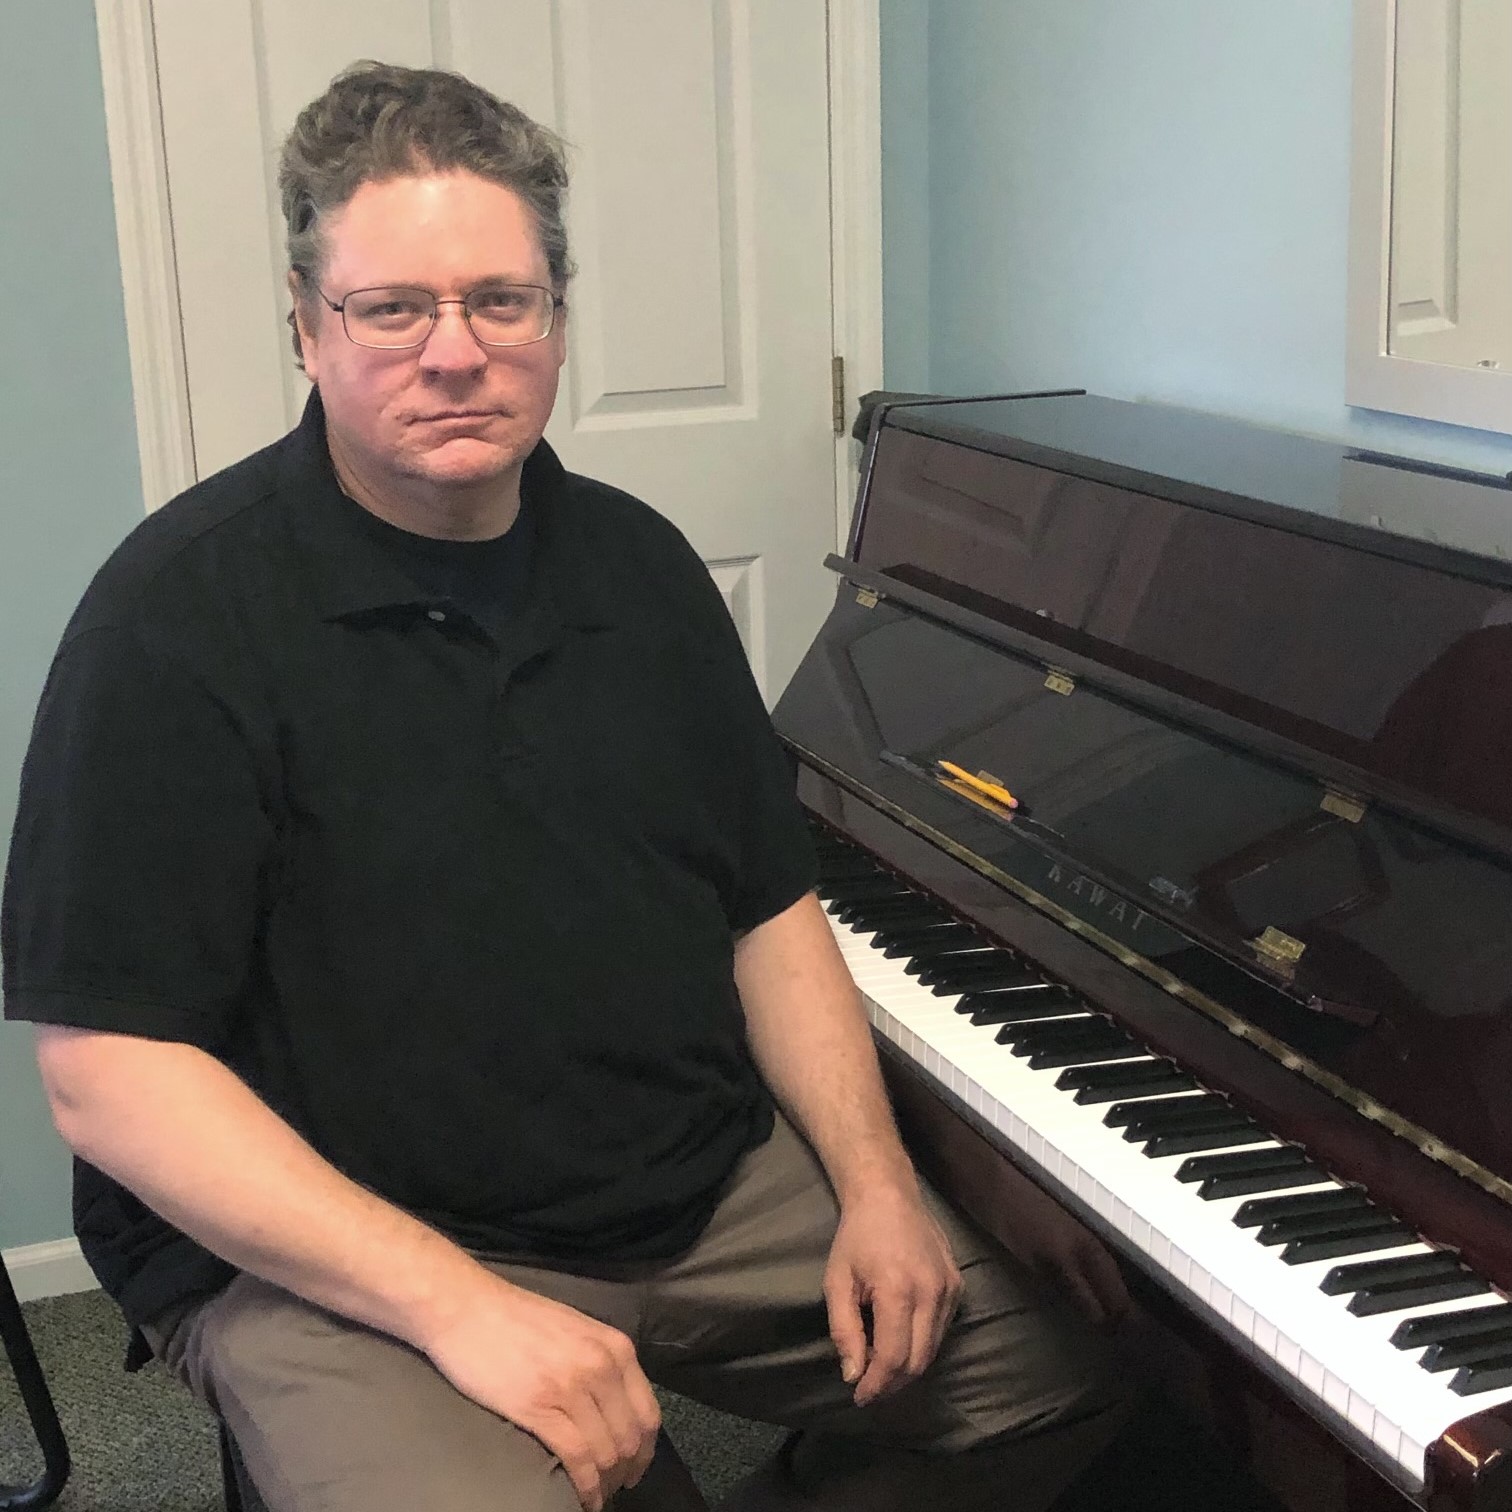 Piano lessons at the NJ School of Music with Bob Thomas